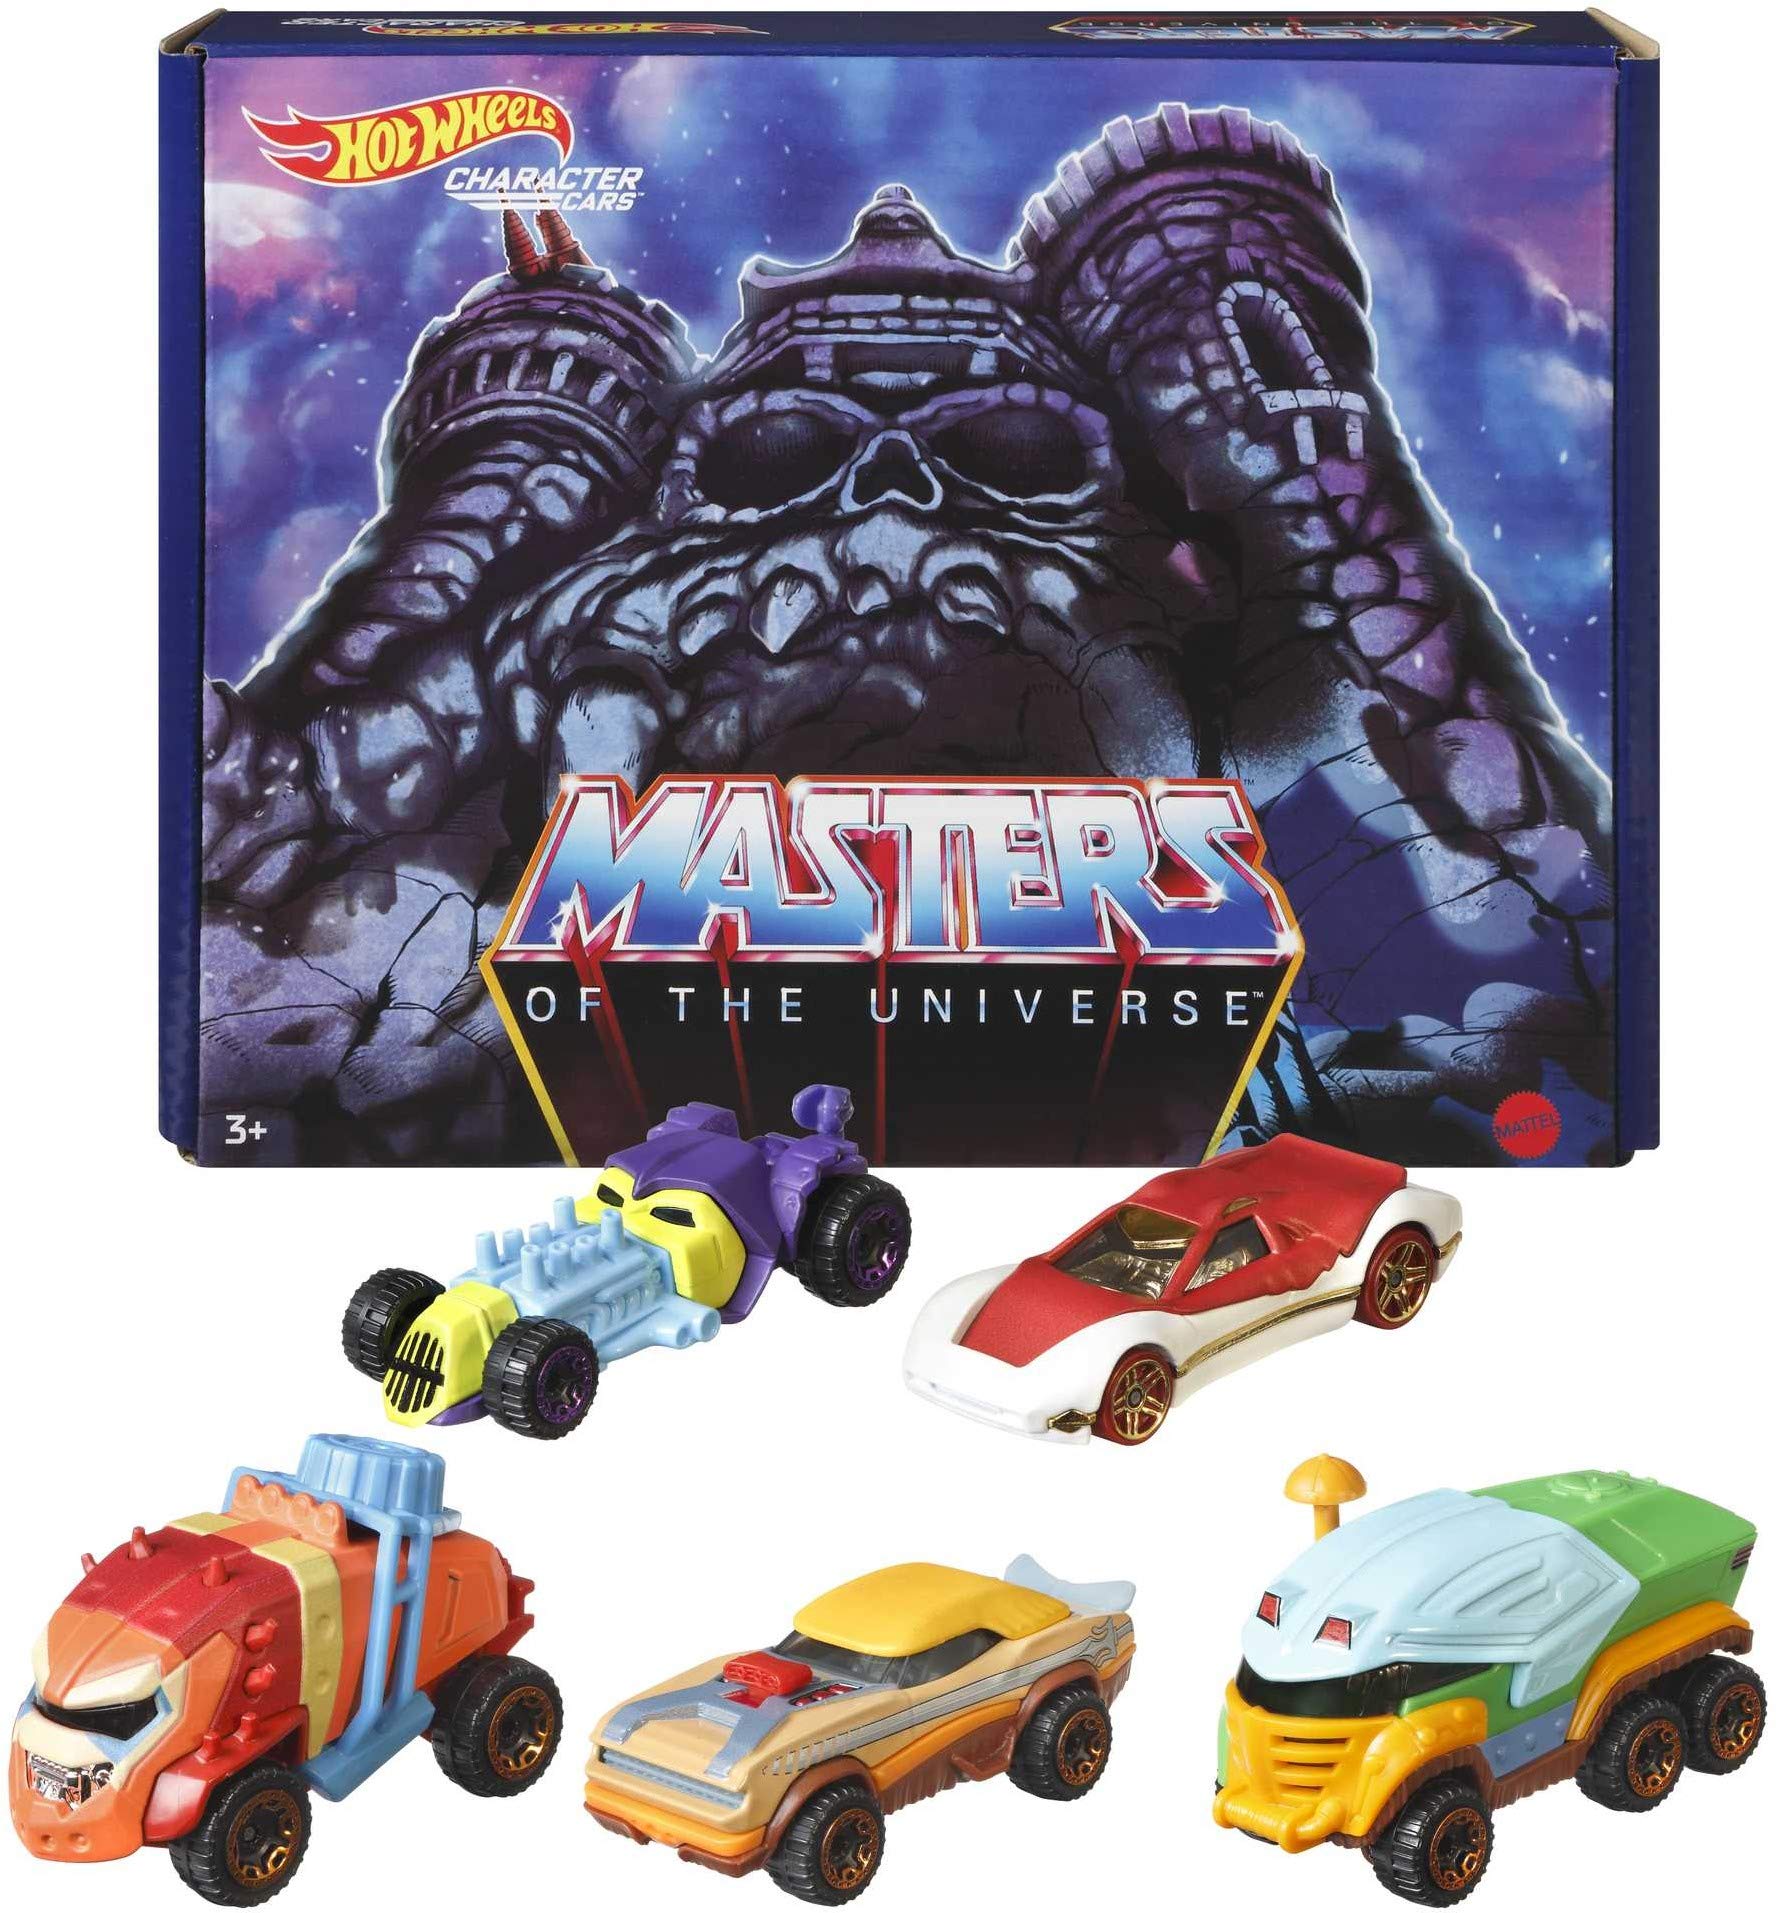 5-Count Hot Wheels Masters of the Universe Character Cars $6 + Free Shipping w/ Prime or on $35+